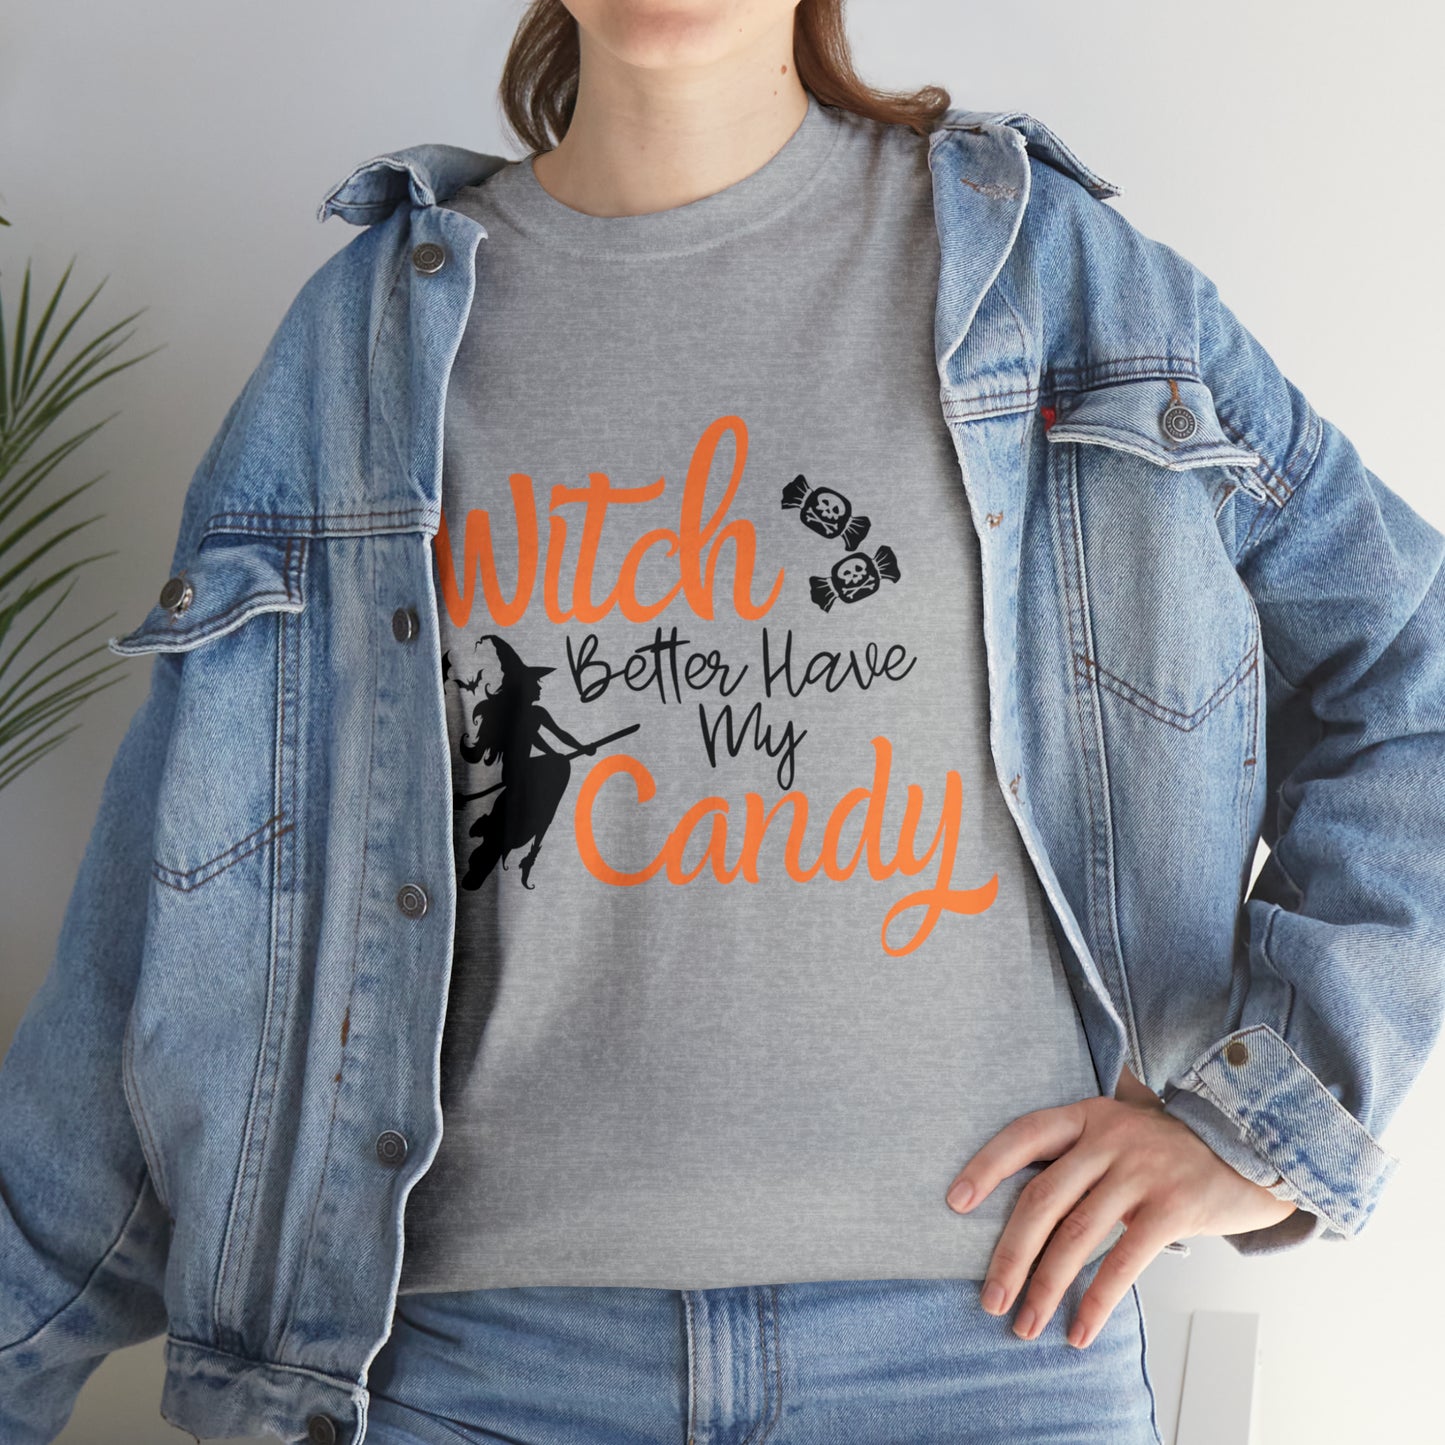 Fun Halloween Unisex Heavy Cotton Tee, Better Have My Candy - trick or treat, different shades available.